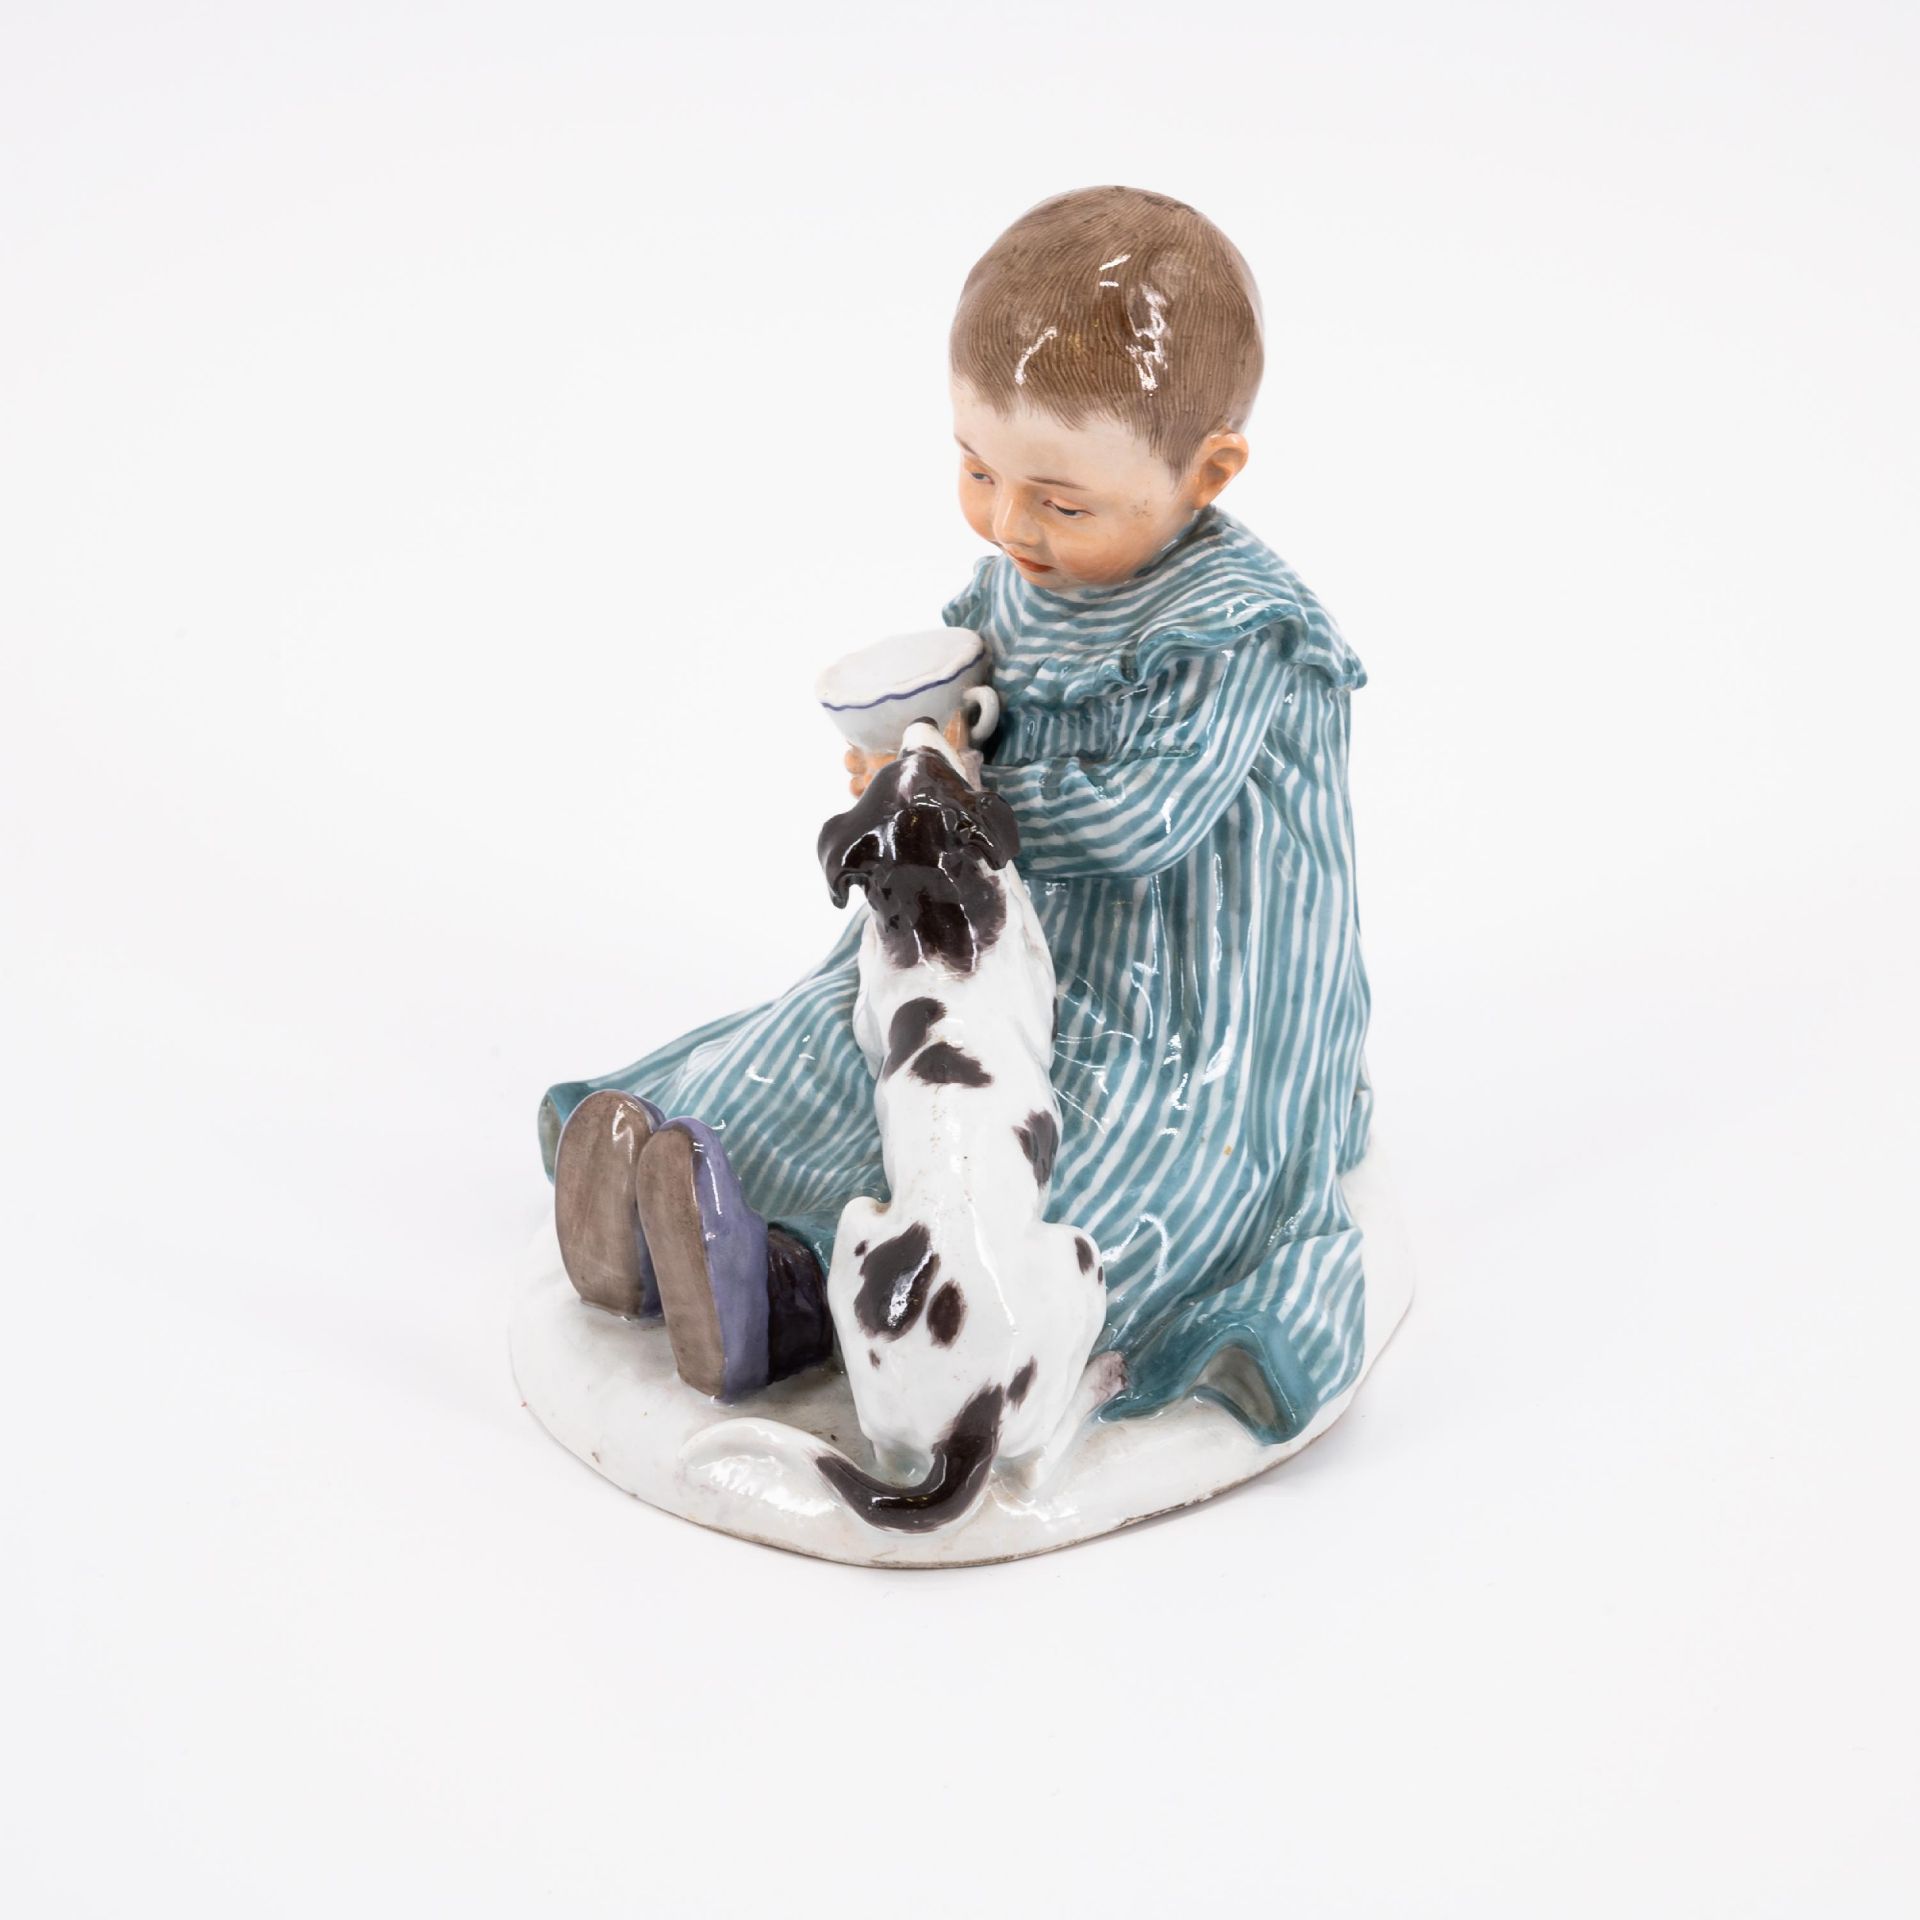 Meissen: PORCELAIN FIGURINE OF A SMALL CHILD WITH CUP AND SMALL DOG - Image 2 of 5